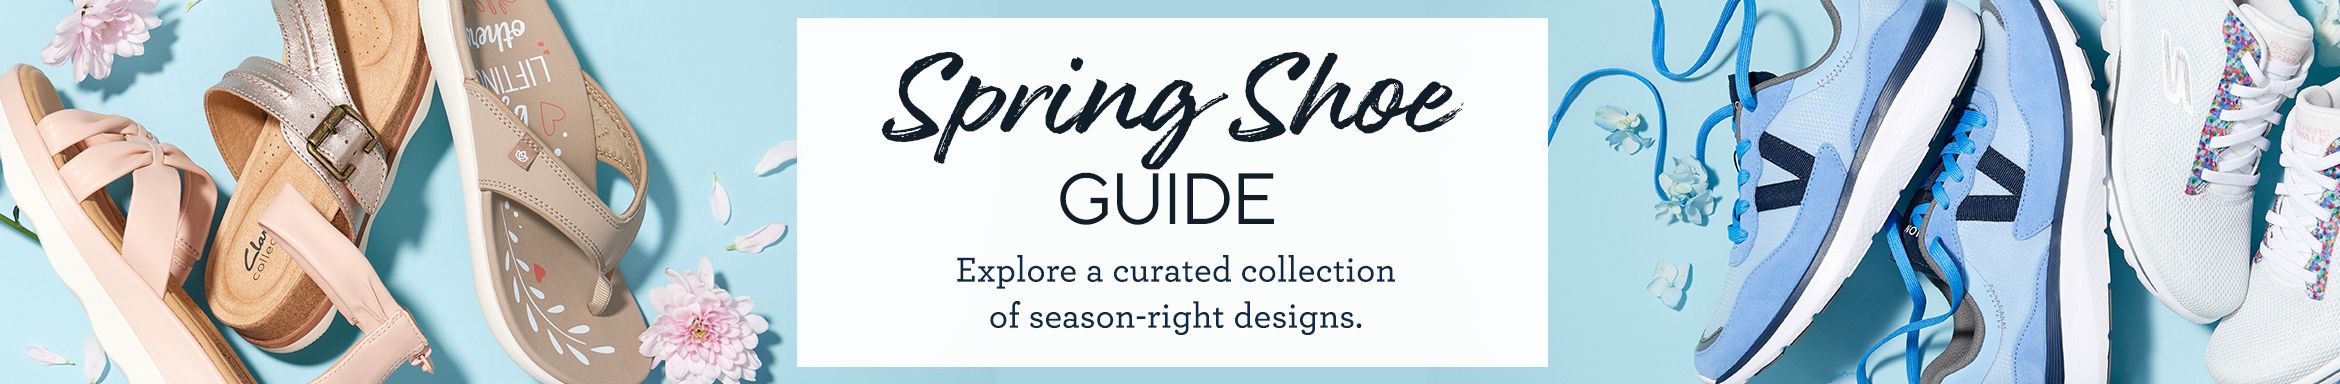 Spring Shoe Guide: Explore a curated collection of season-right designs.